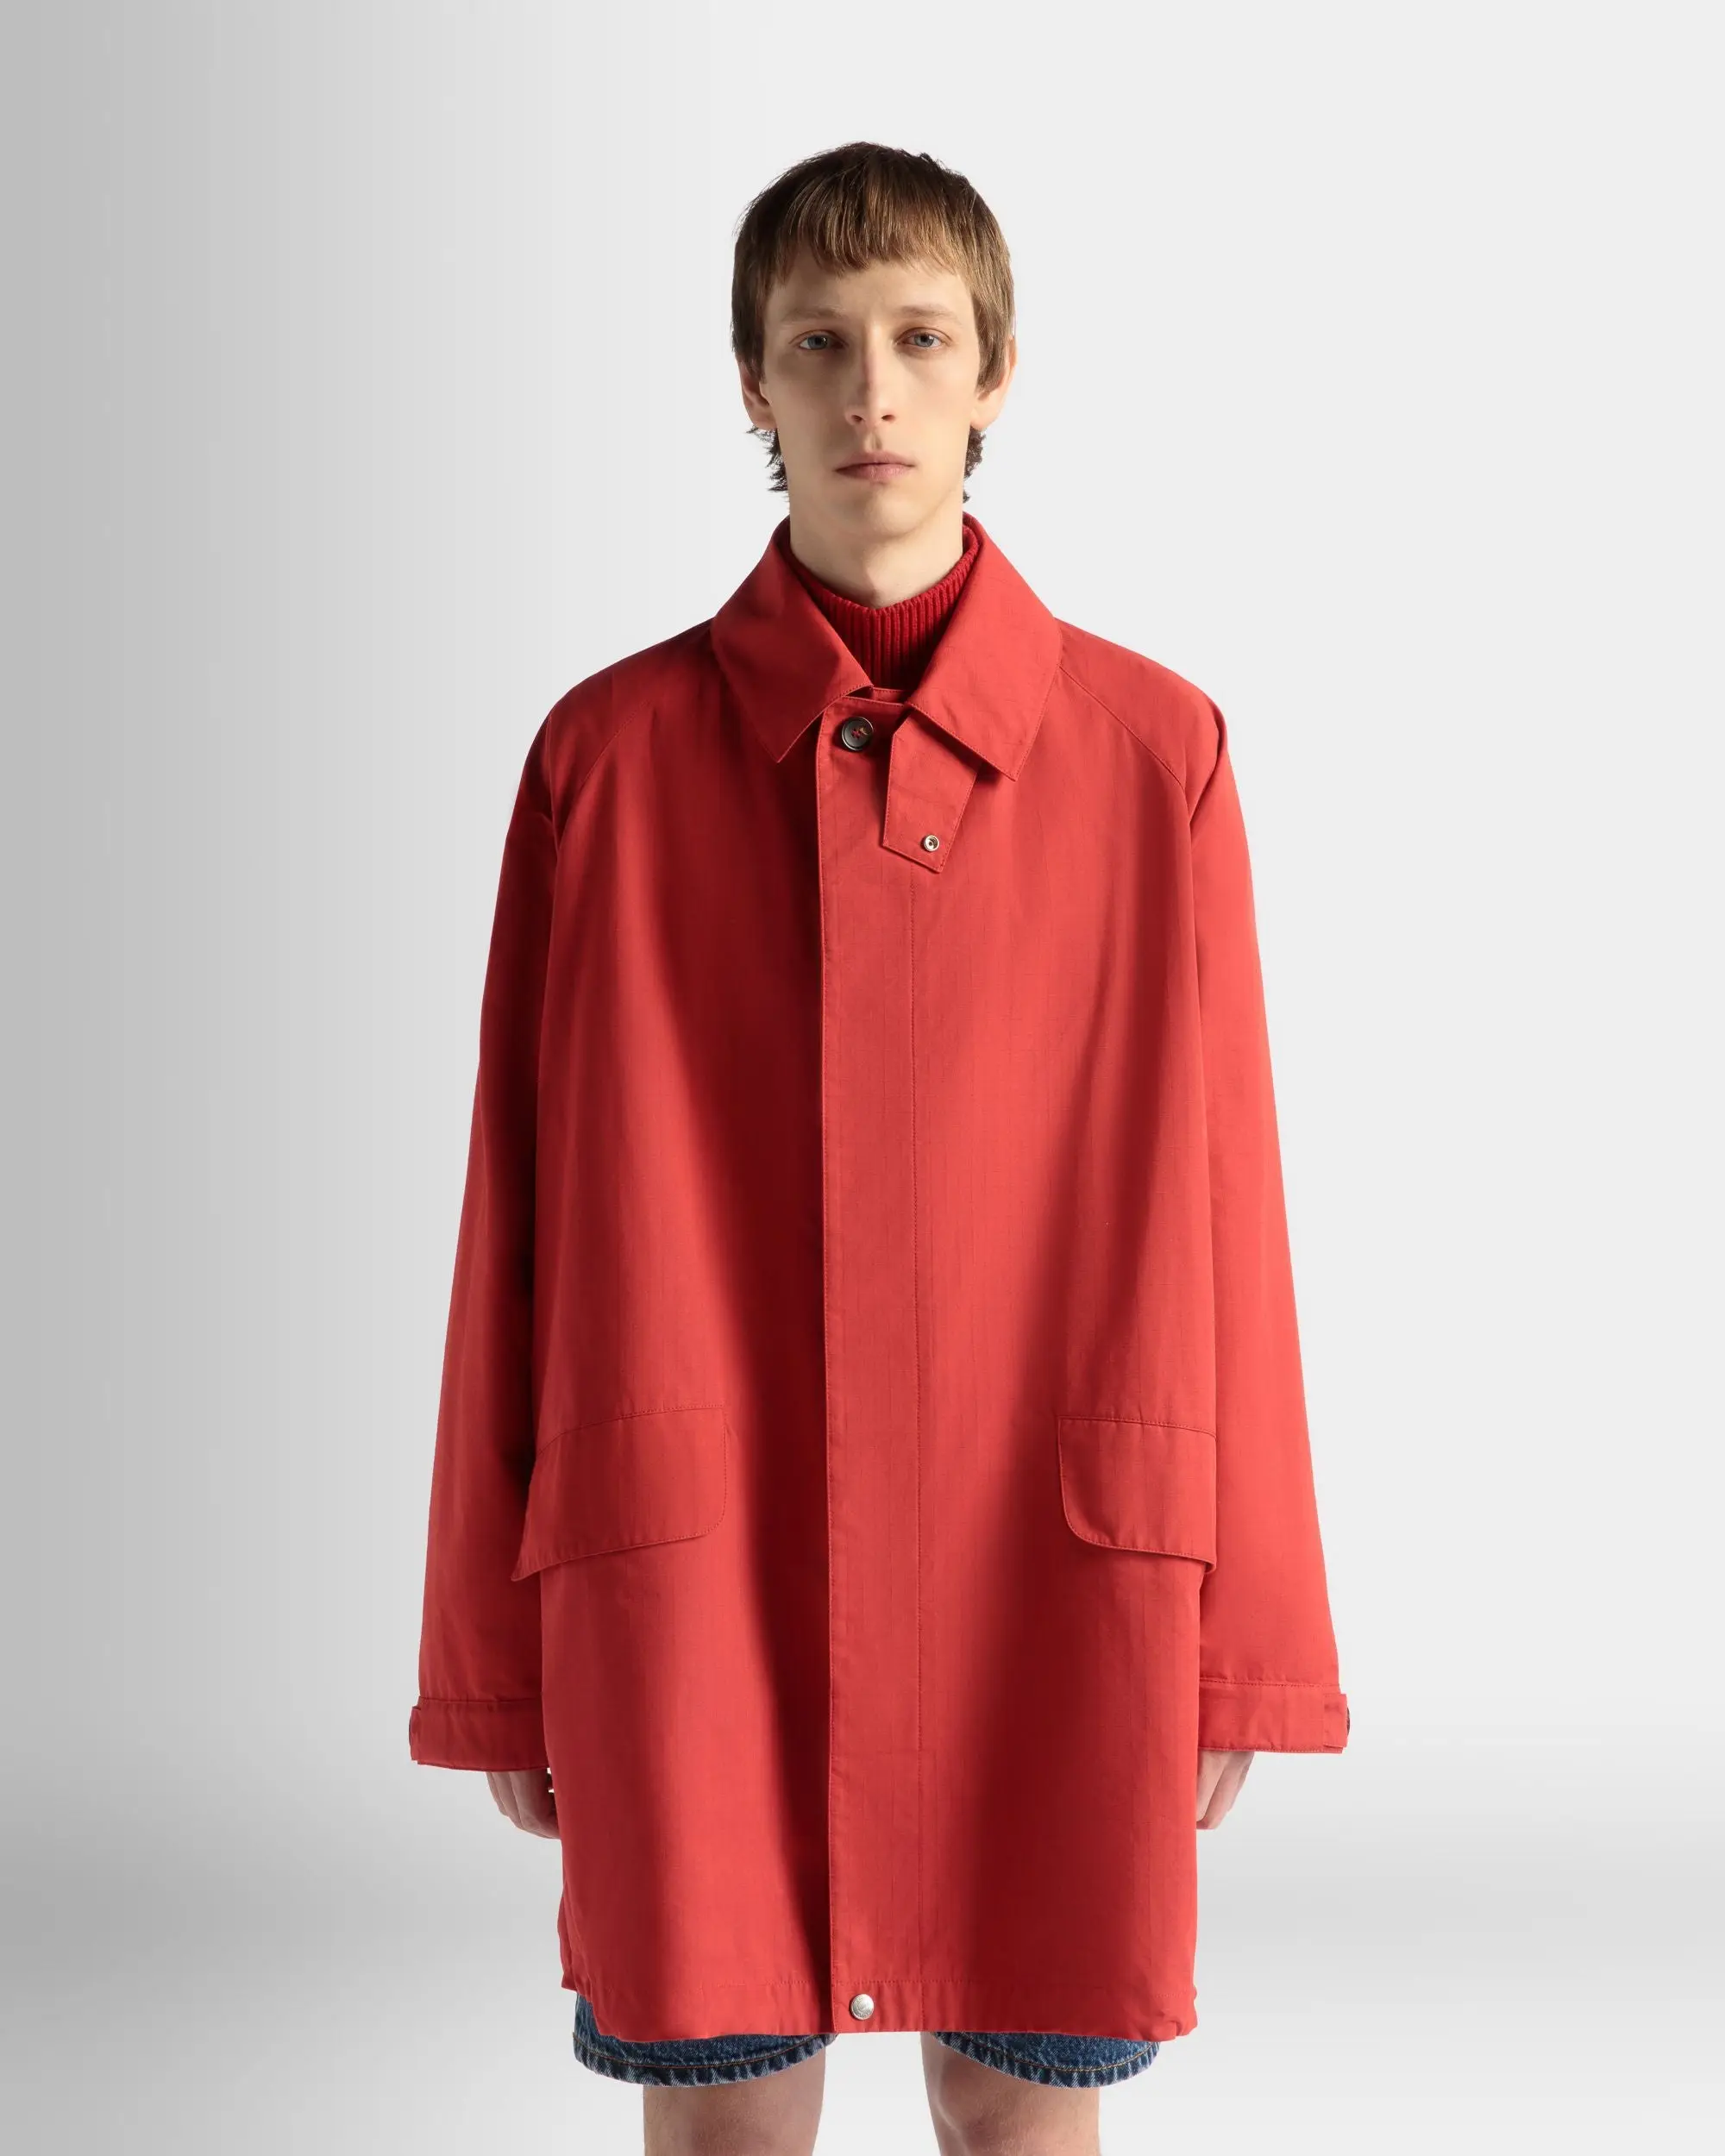 Coat in Candy Red Nylon